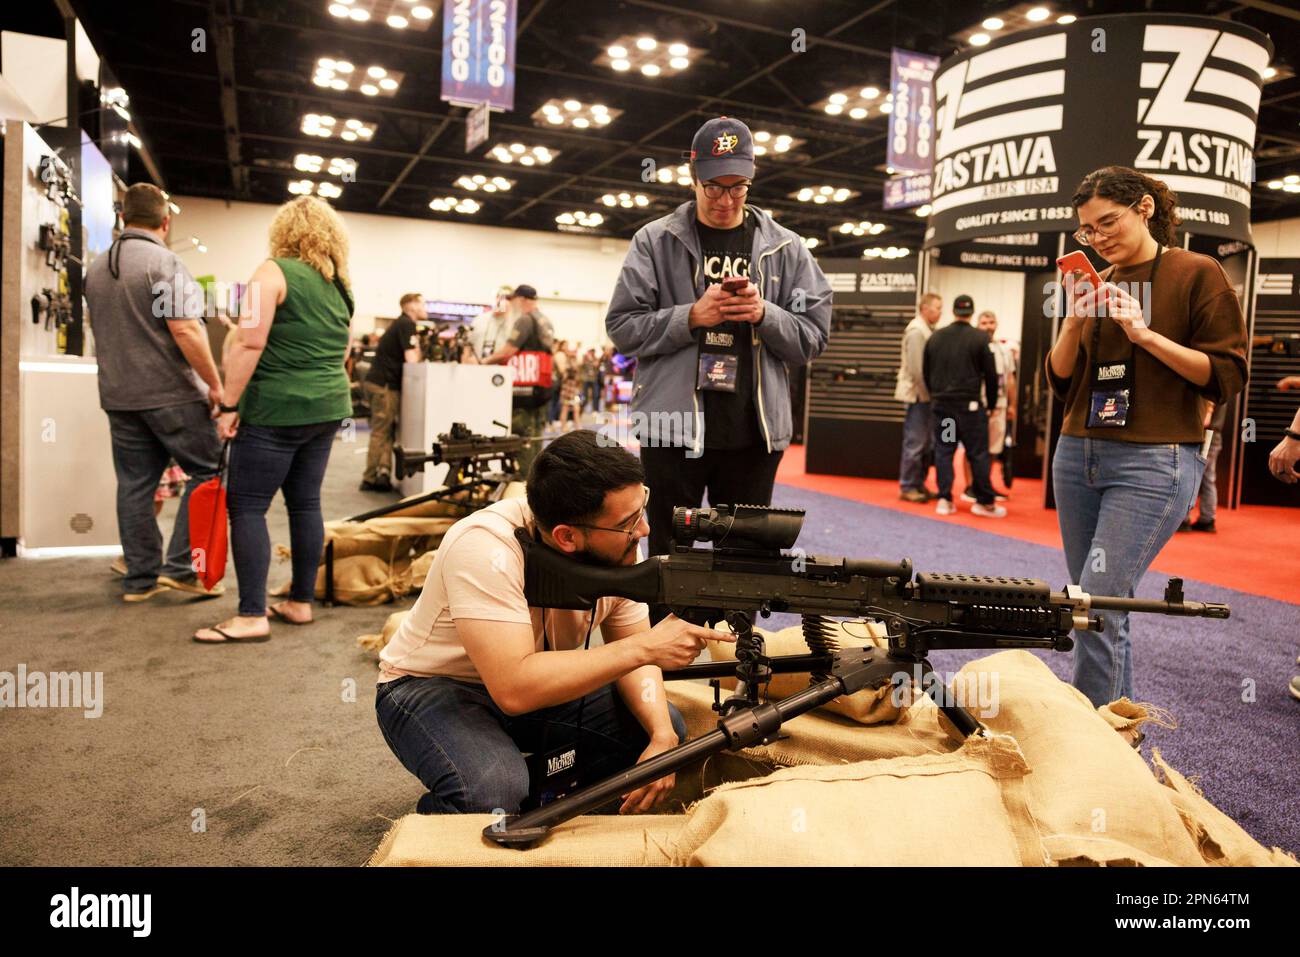 INDIANAPOLIS, INDIANA - APRIL 15: A guest looks through the sites of a machine gun at the at the Ohio Ordnance Works Inc., booth during the National Rifle Association's Annual Meetings & Exhibits at the Indiana Convention Center on April 15, 2023 in Indianapolis, Indiana. The convention, which is expected to draw around 70,000 guests opened Friday. (Photo by Jeremy Hogan/The Bloomingtonian) Stock Photo